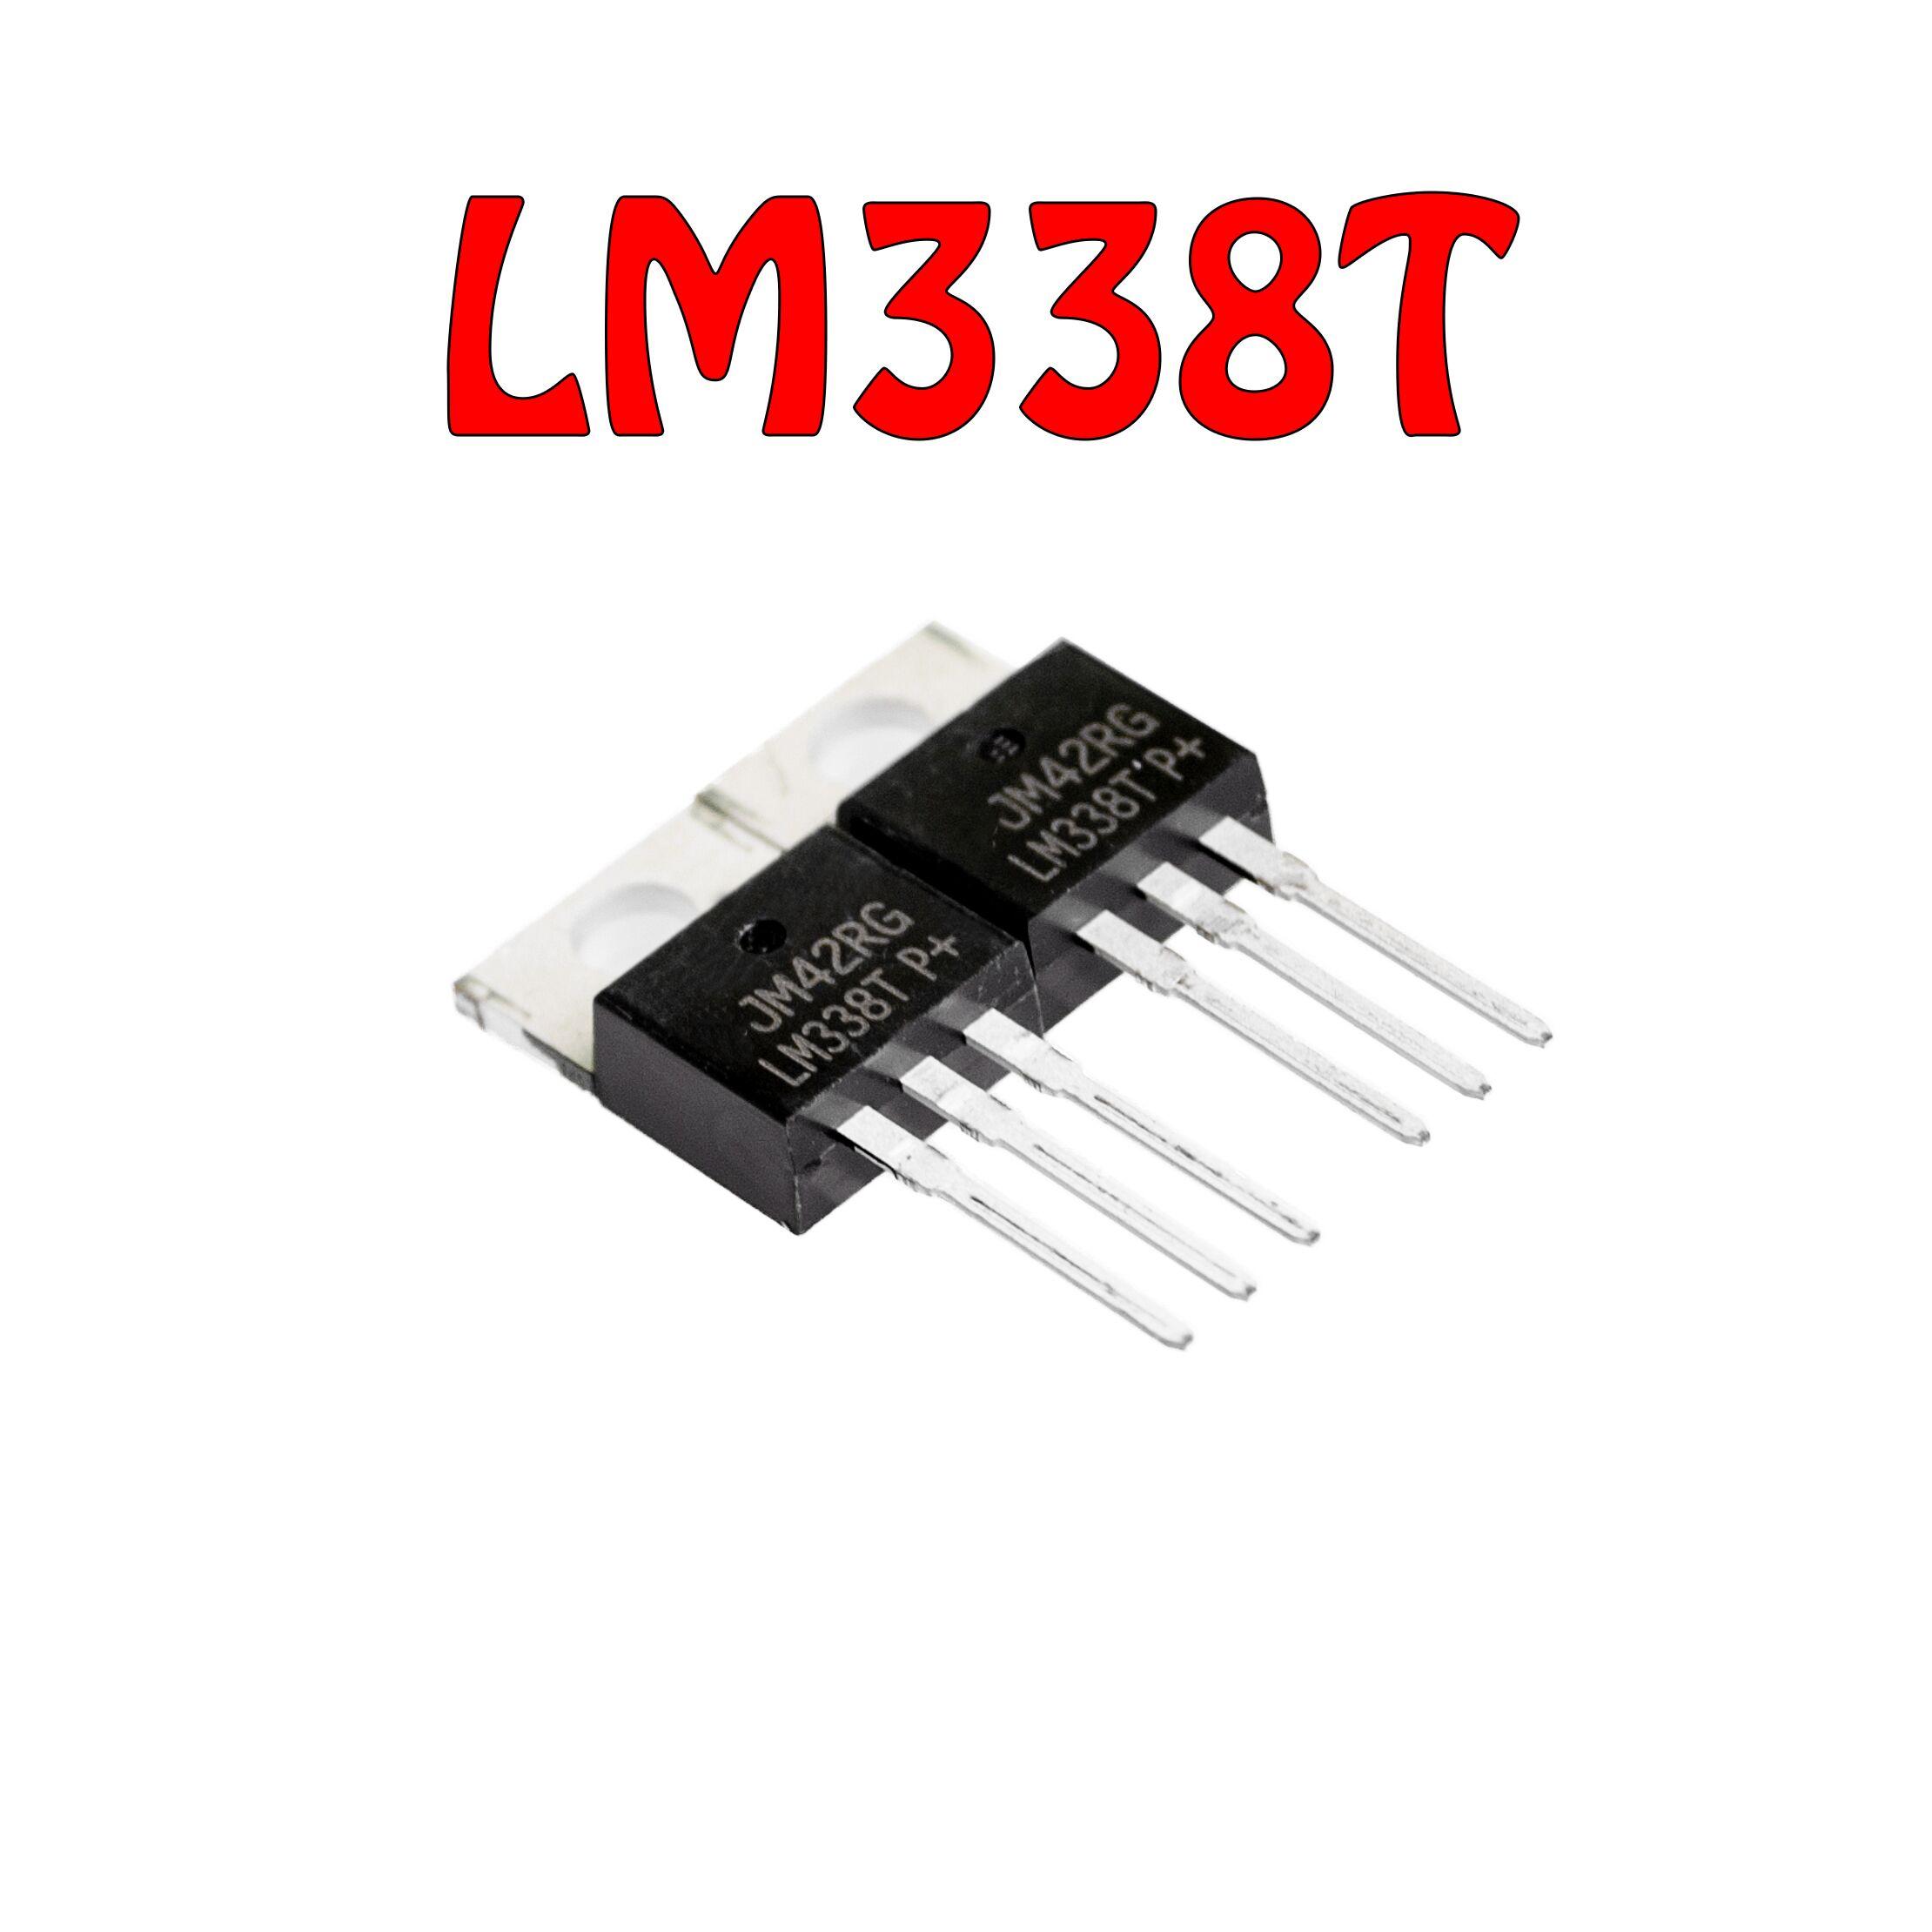 10pcs LM338T LM338 TO-220 Transistor make in china